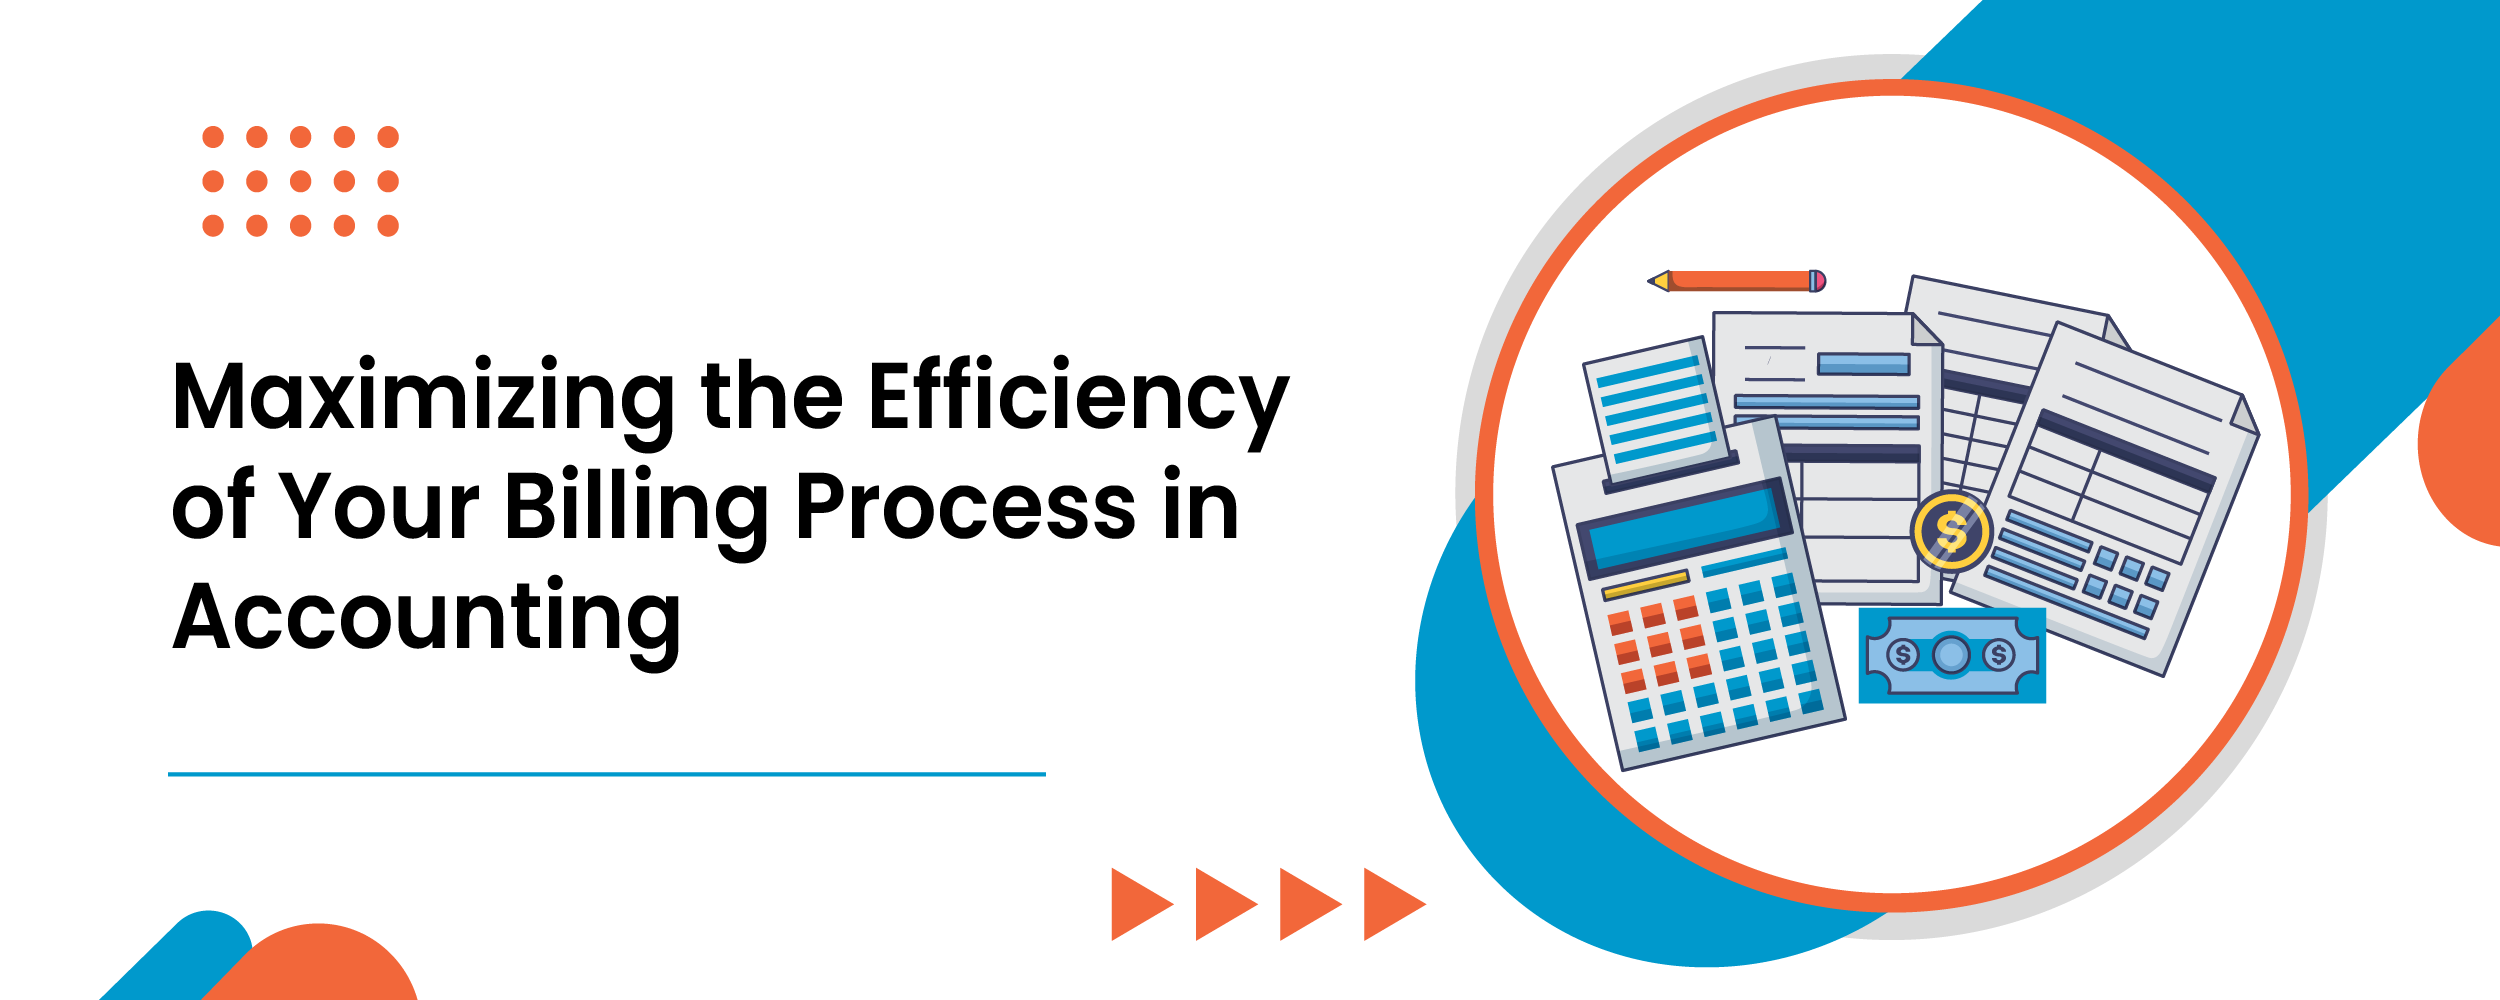 Billing Process in Accounting